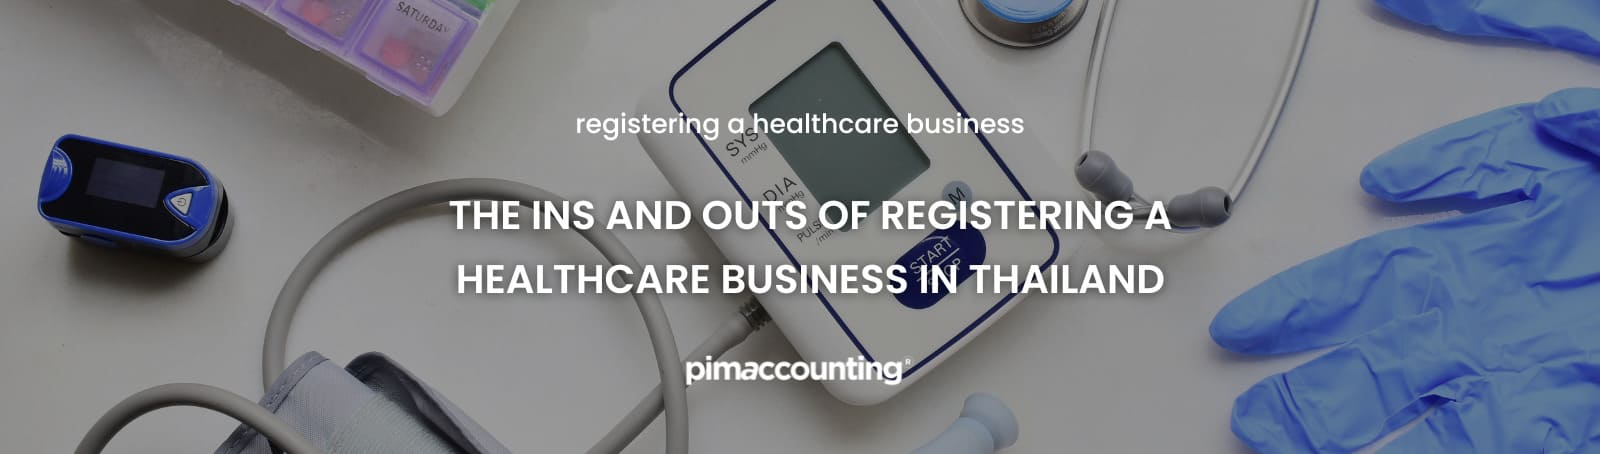 The ins and outs of registering a healthcare business in Thailand -  Pimaccounting